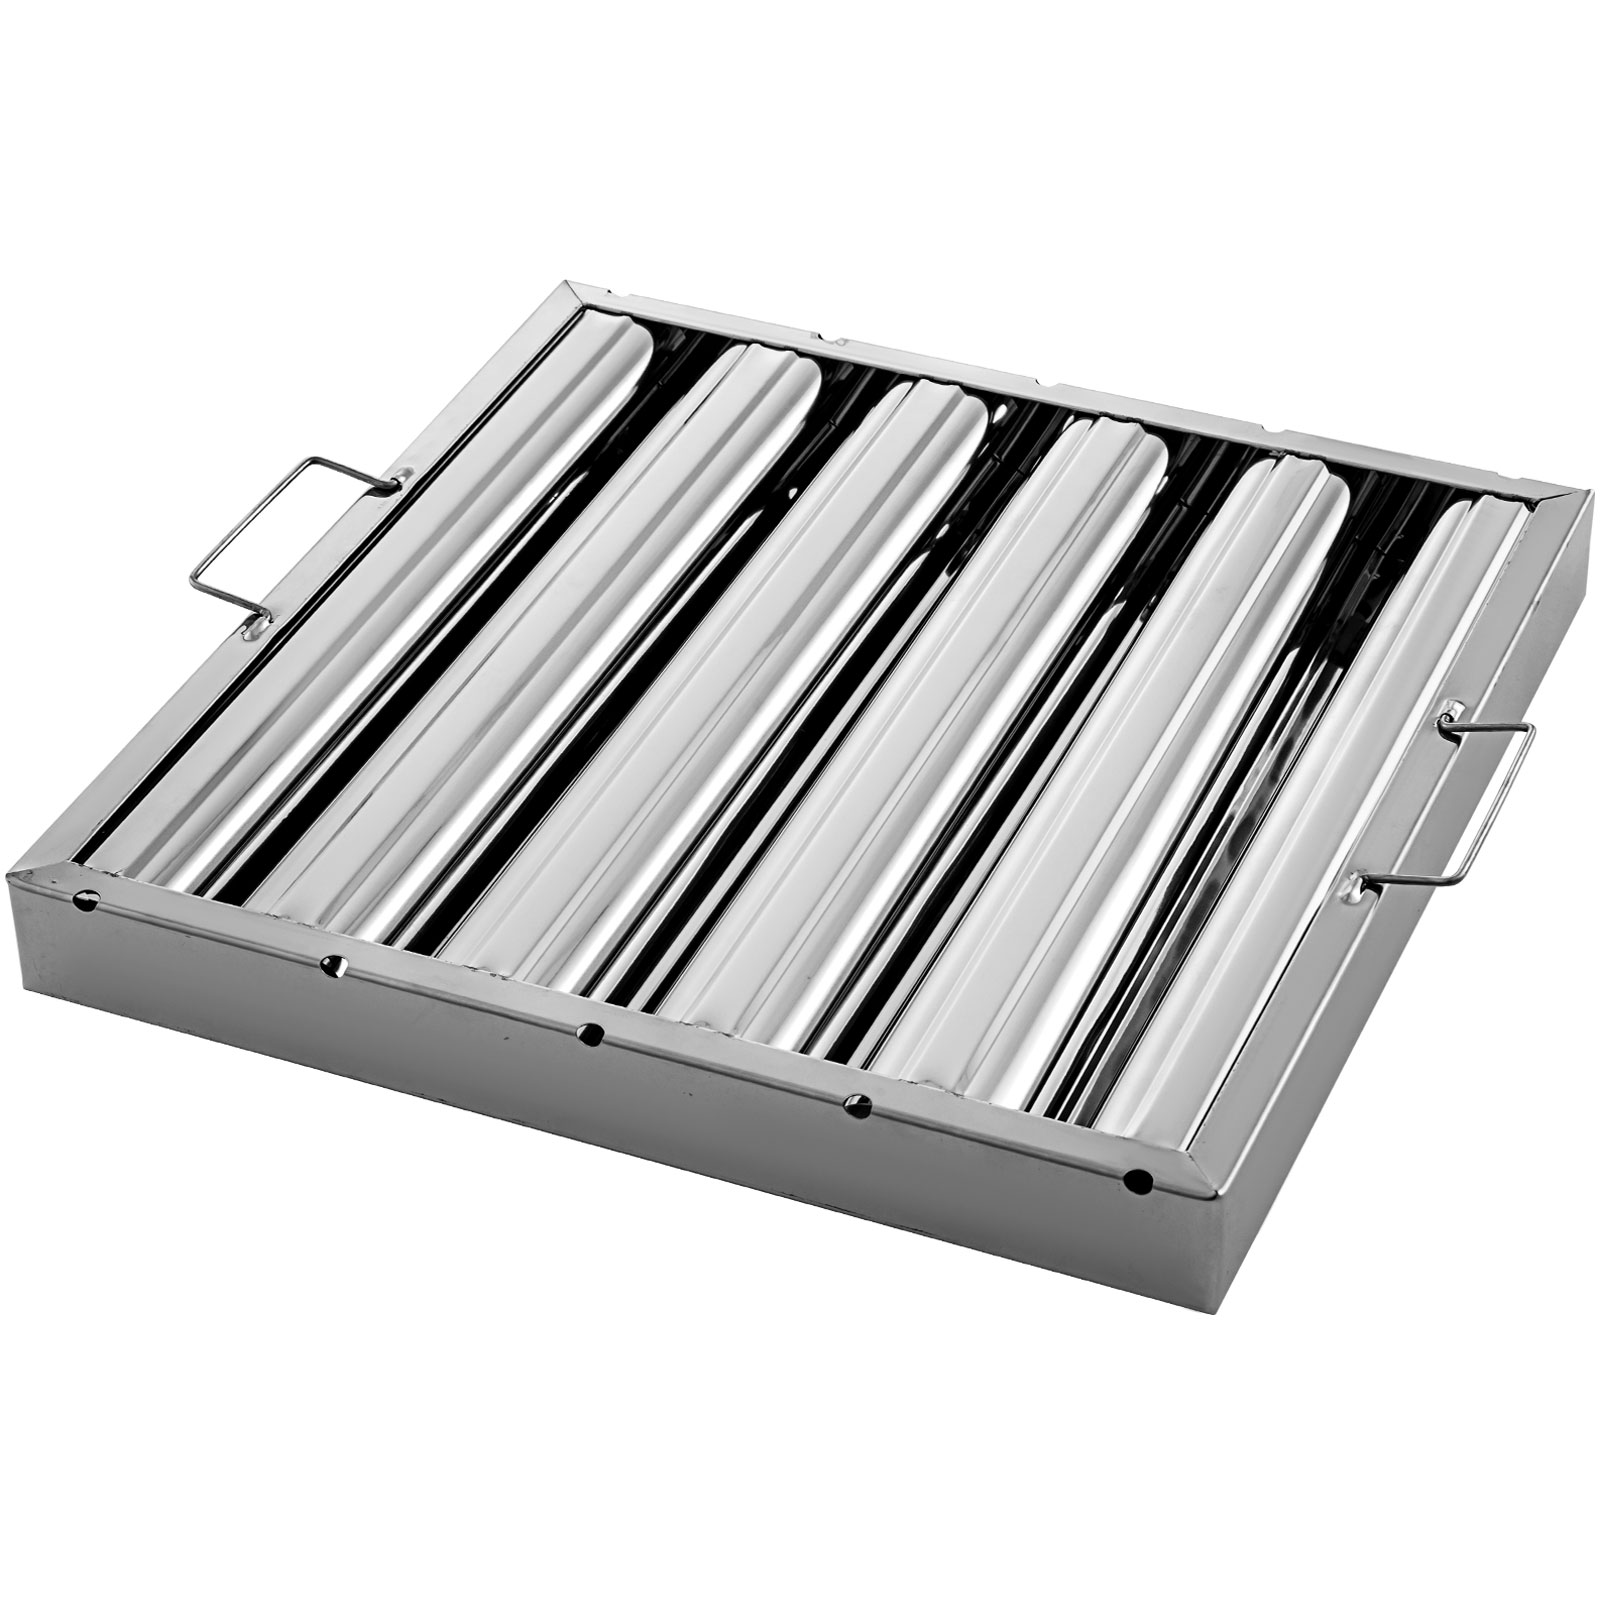 6 PACK Commercial Kitchen Stainless Steel Exhaust Hood Vent Grease Filter Baffle 